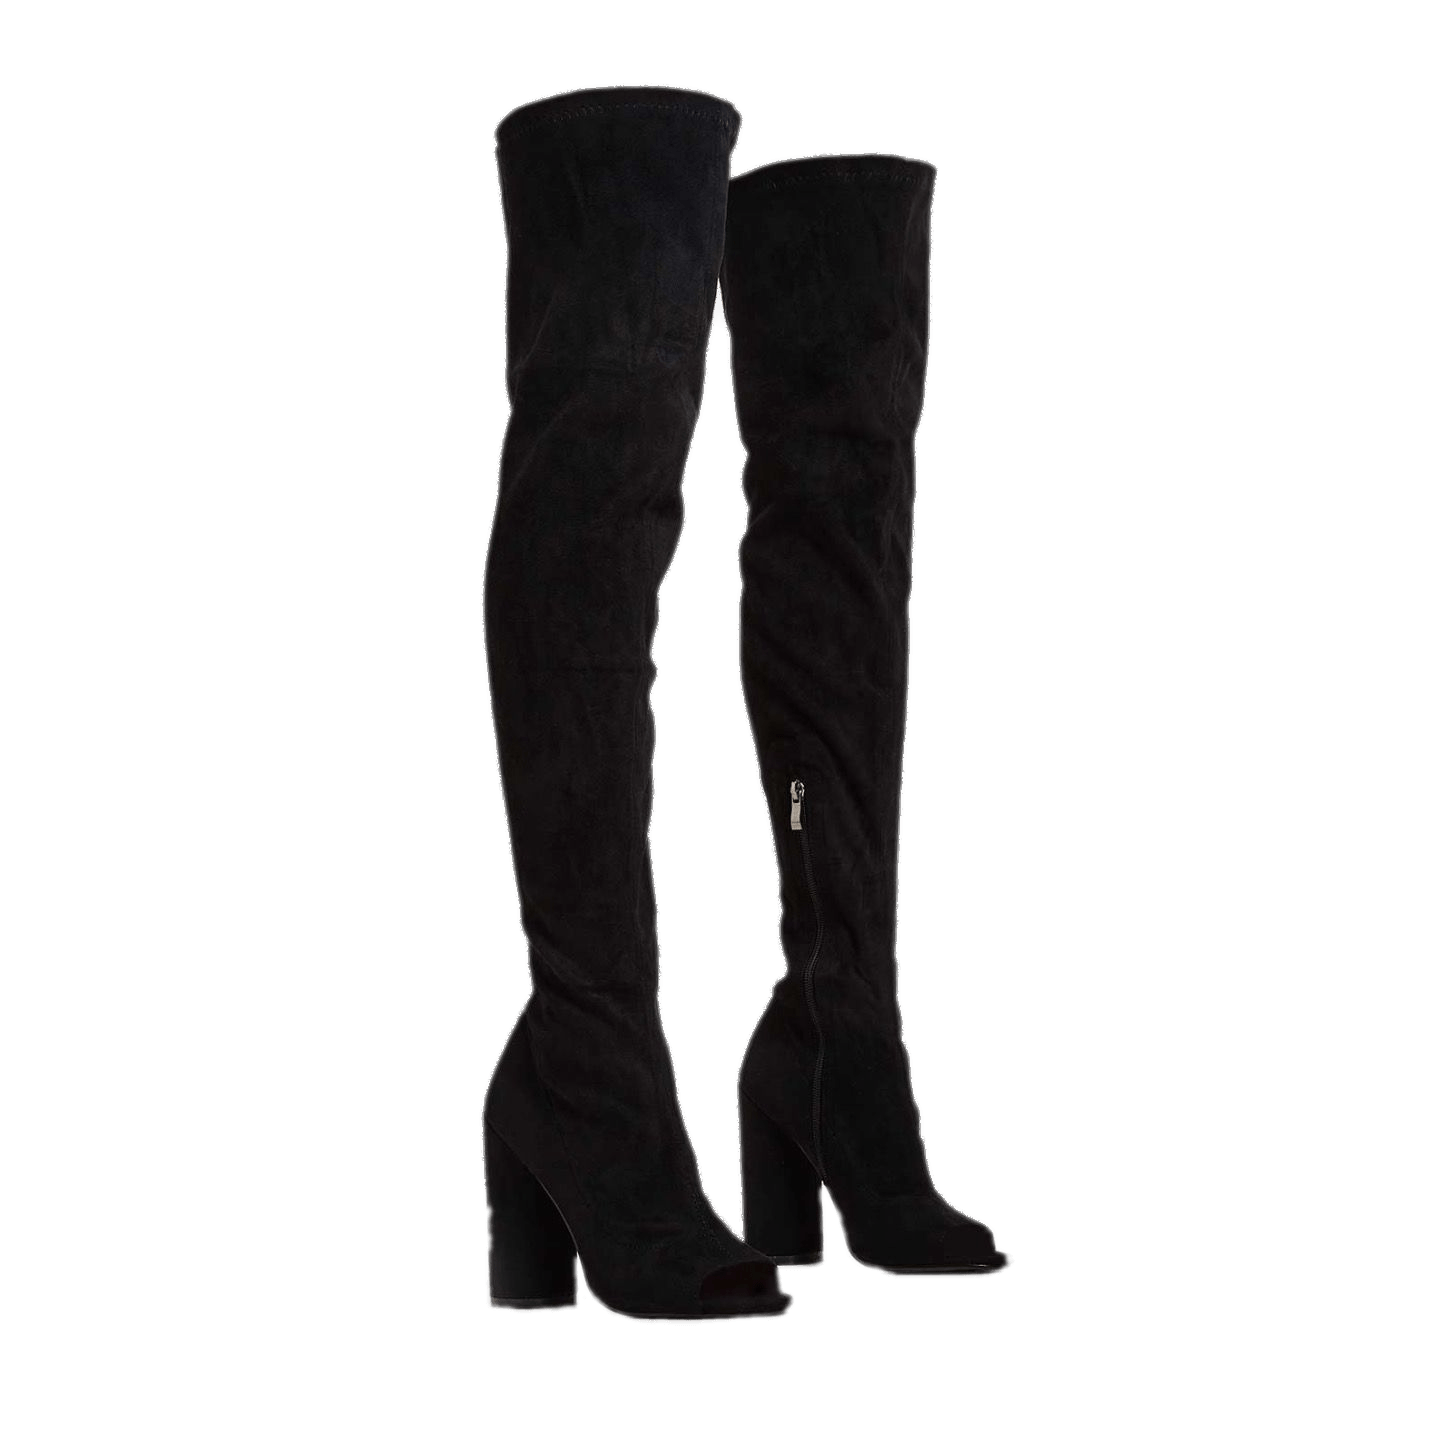 Boots PNG Isolated Image